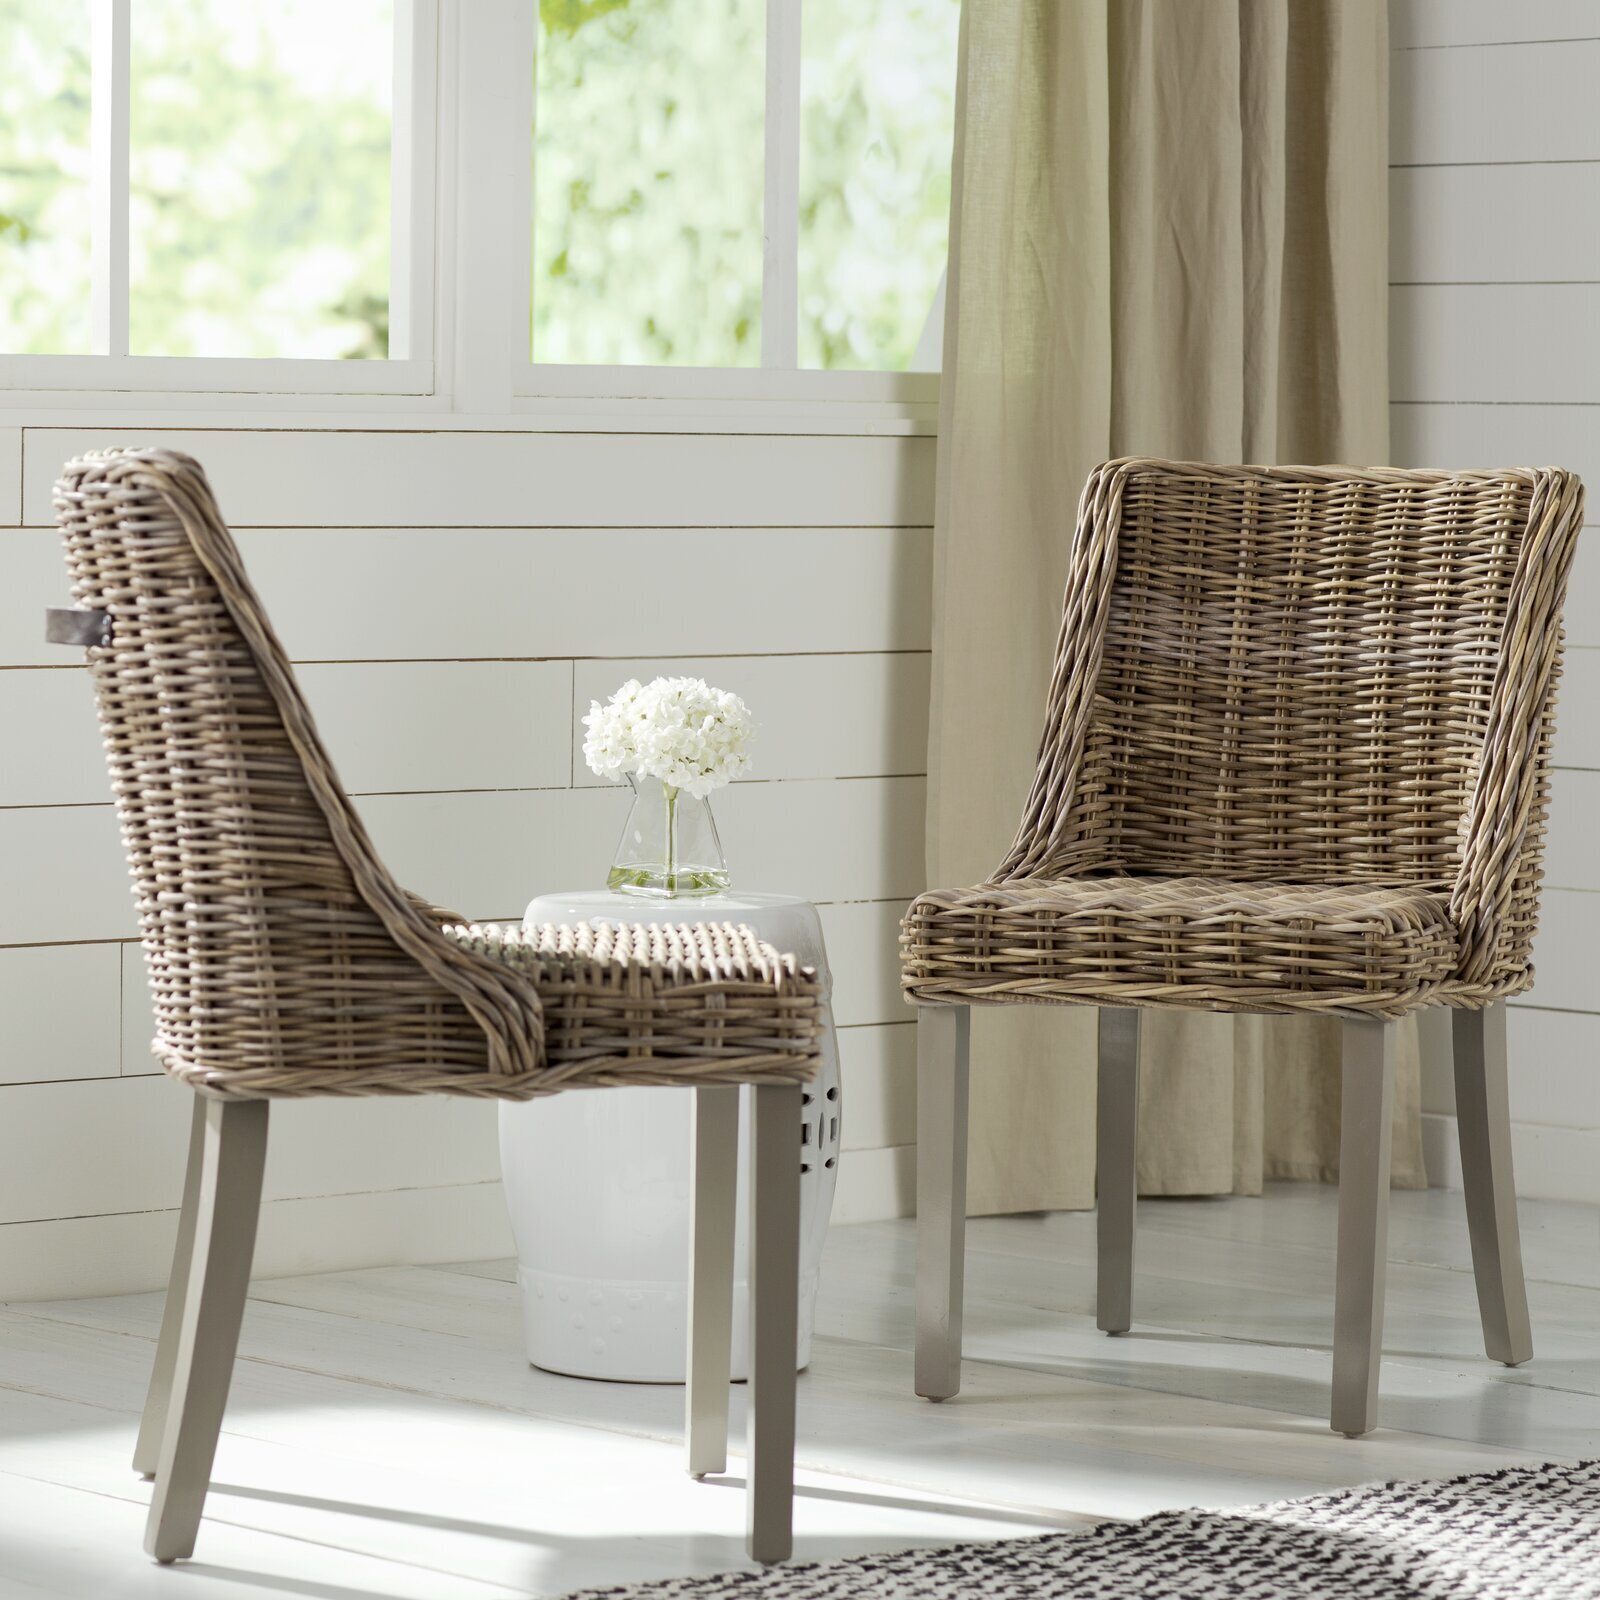 Indoor Wicker Dining Chairs With Wide Seats